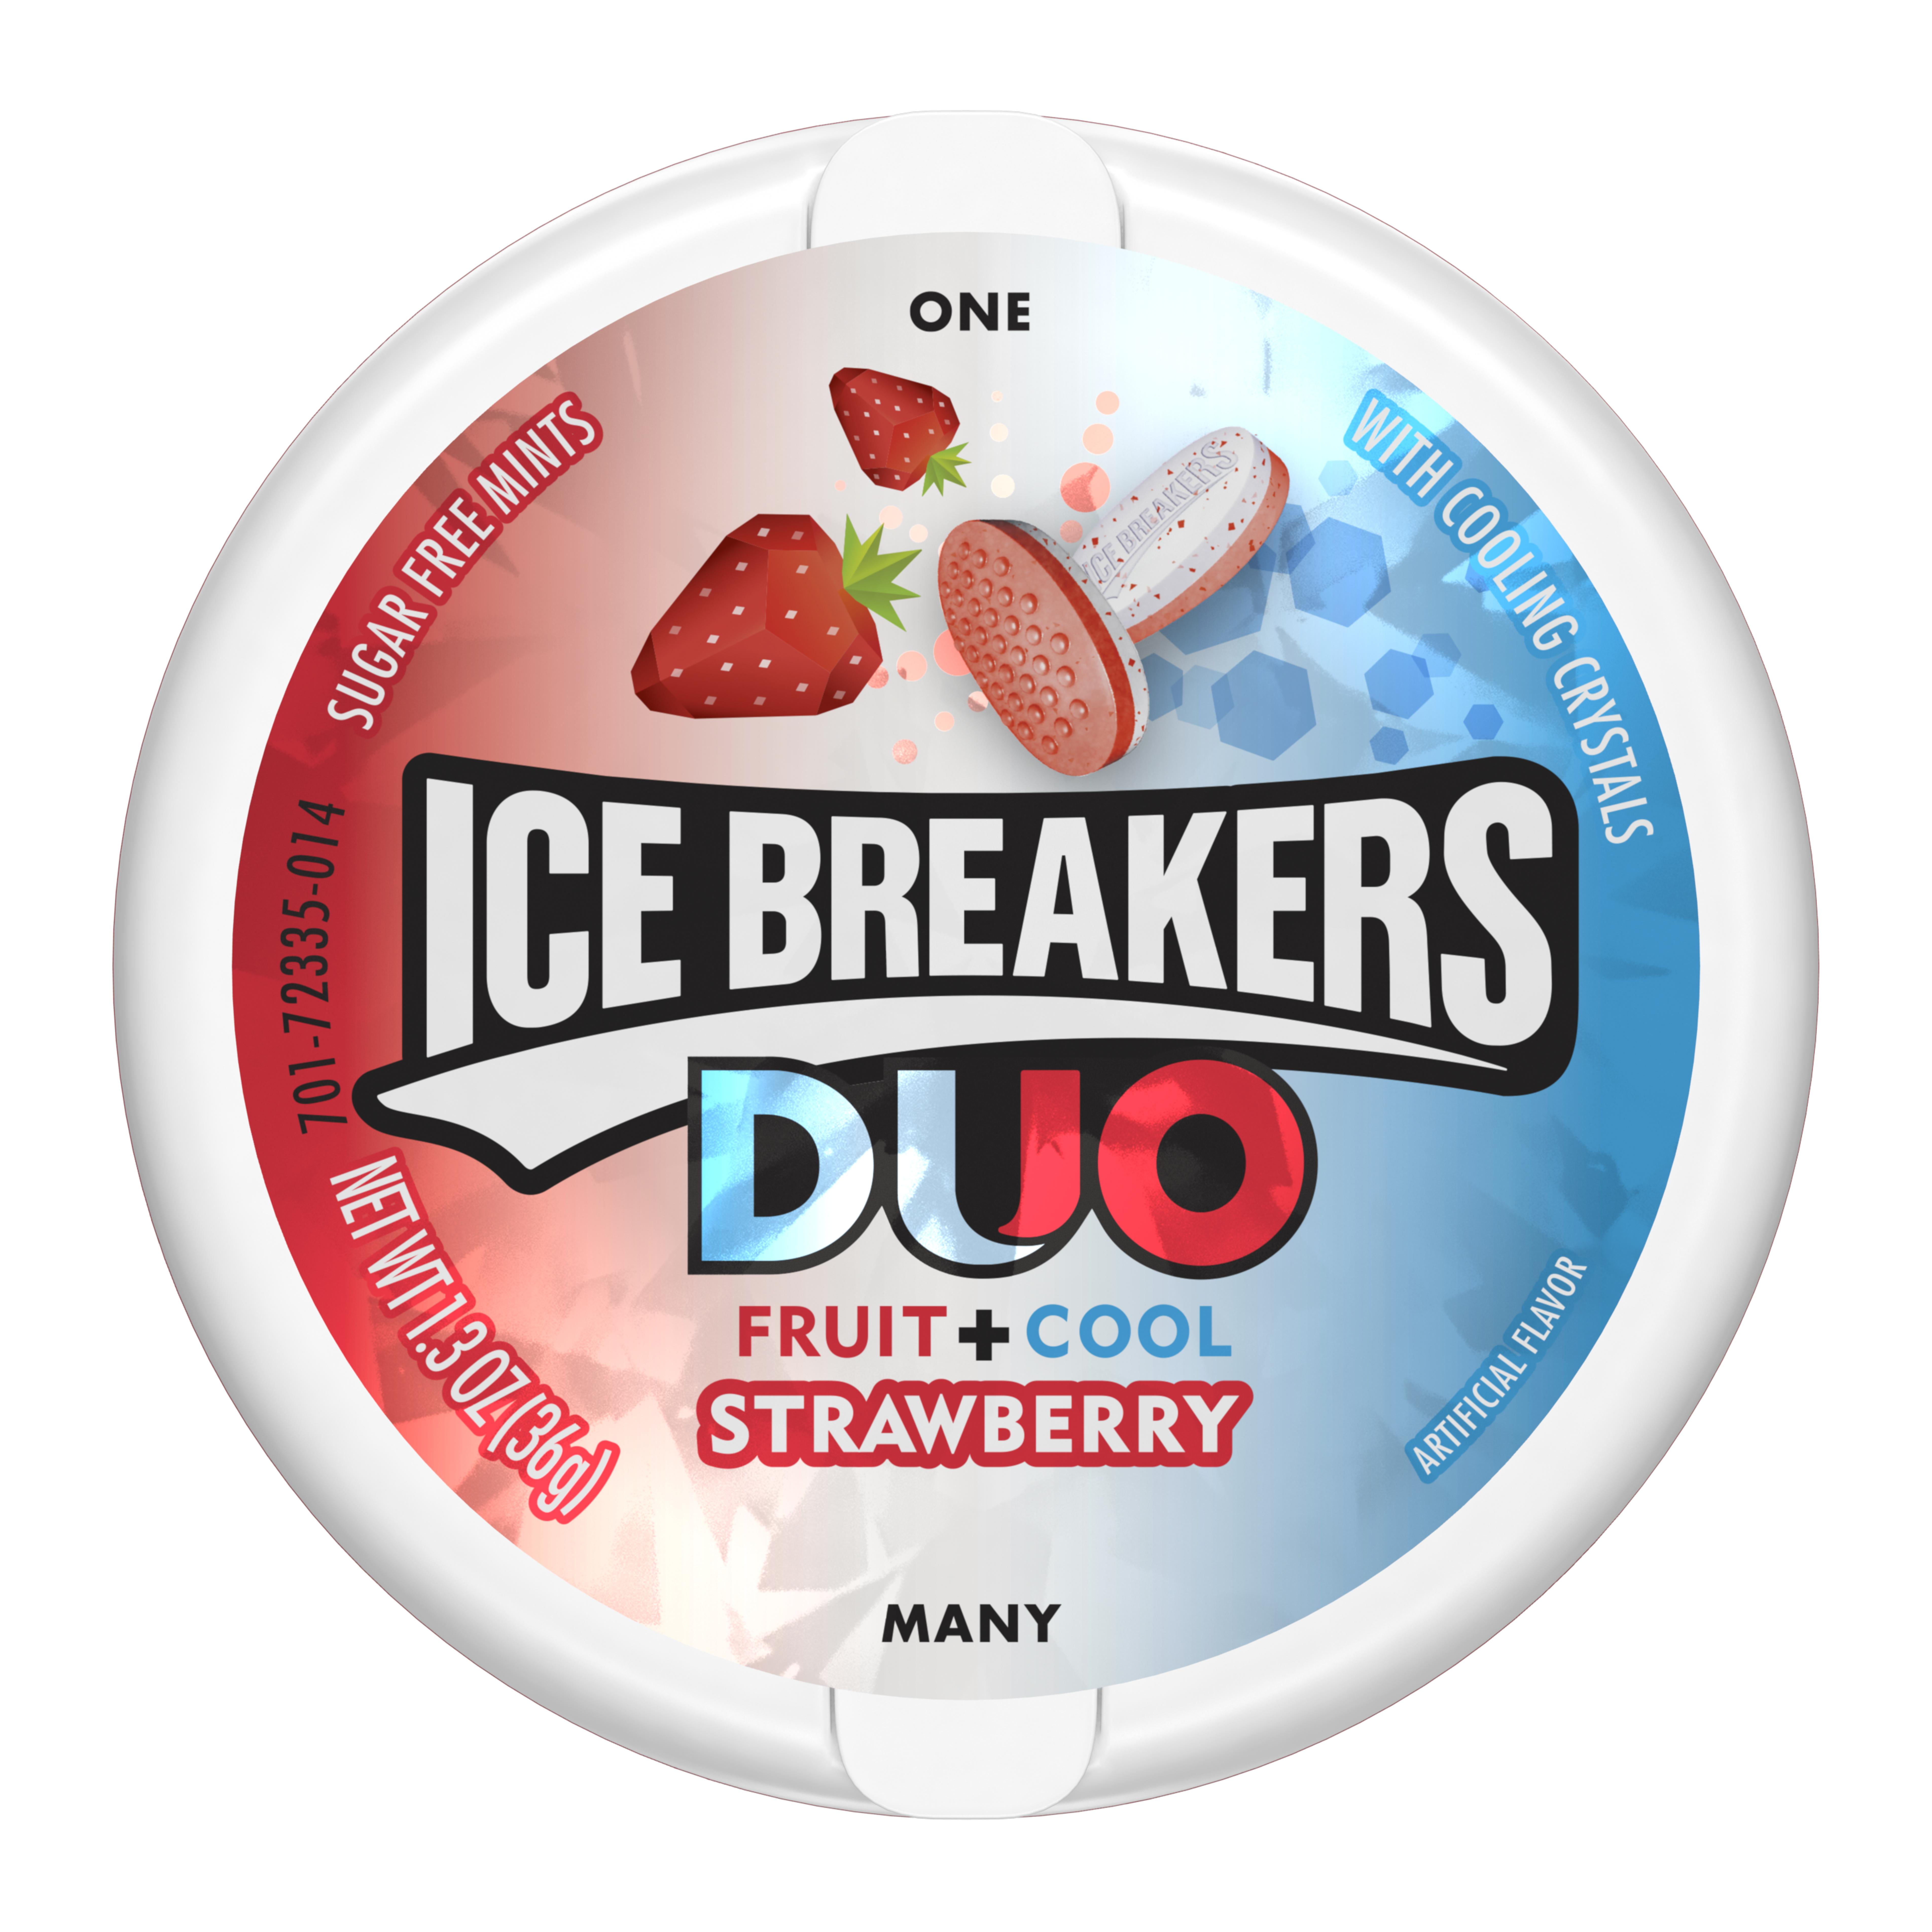 ICE BREAKERS DUO Strawberry Flavored Sugar Free Breath Mints, Mint Candy, 1.3 oz, Tin